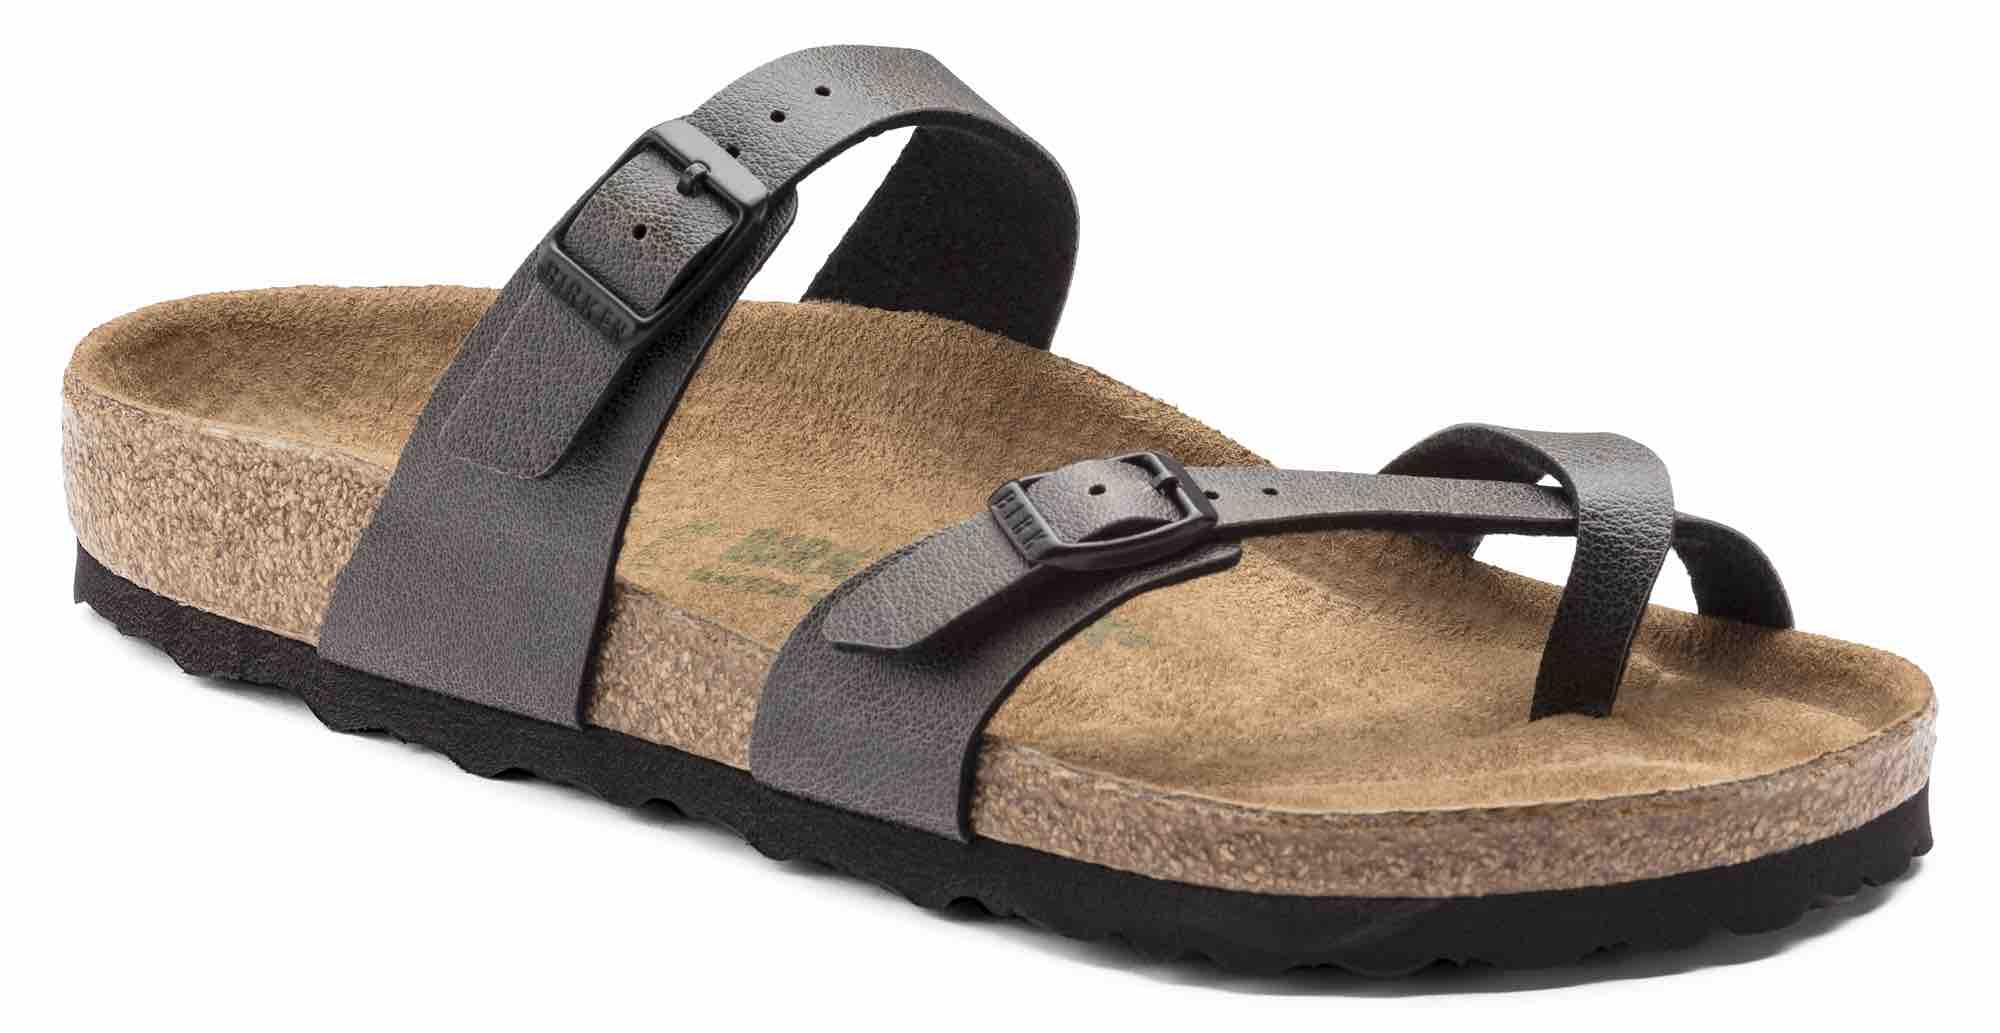 Vegan Birkenstocks Are A Thing, But Should We Be Wearing Them? - Happy ...